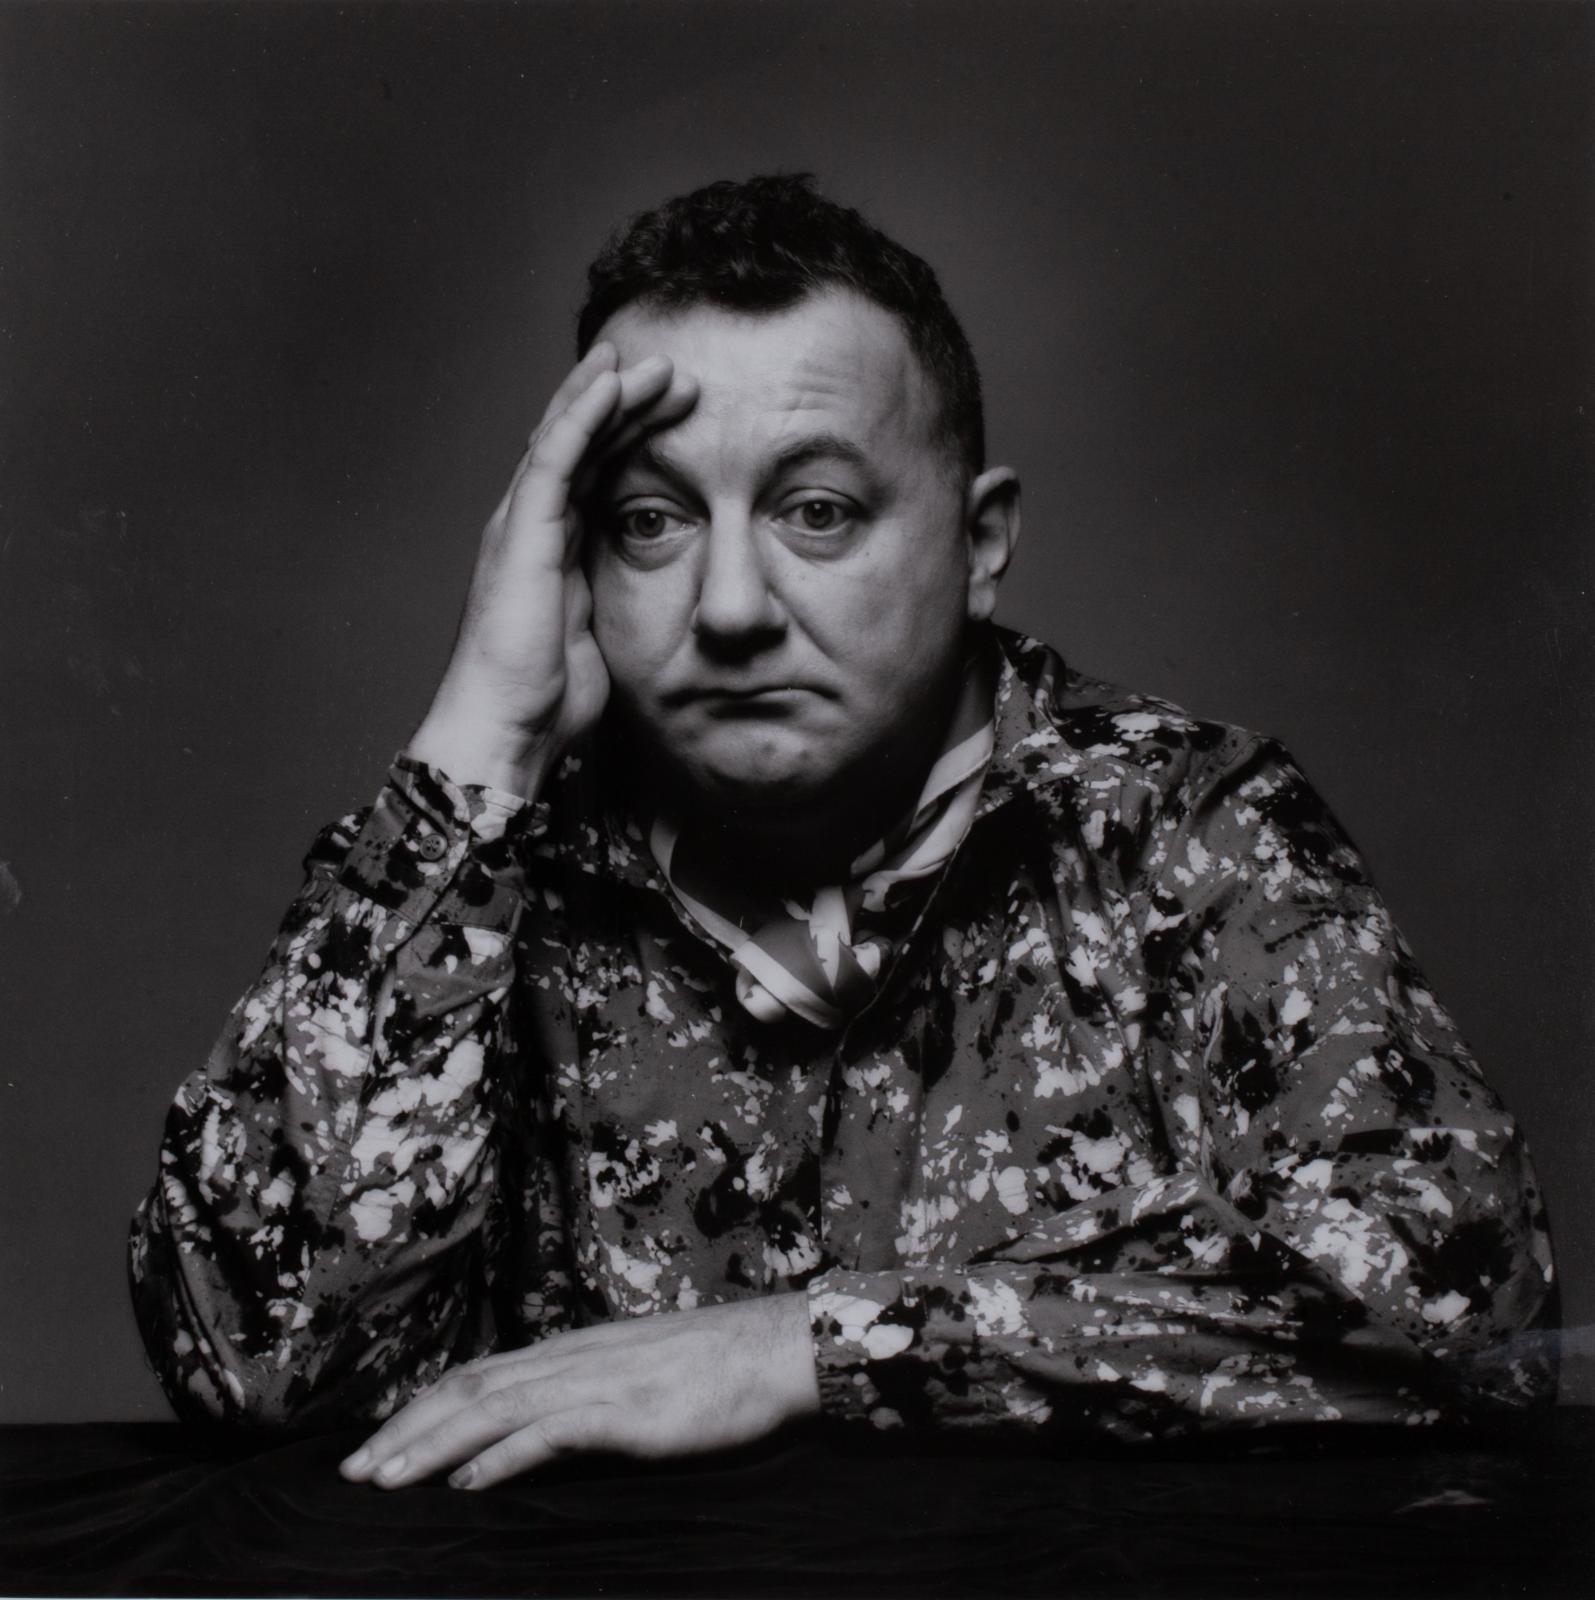 Artwork by Jean-Loup Sieff, Coluche, Made of gelatin silver print mounted on cardboard